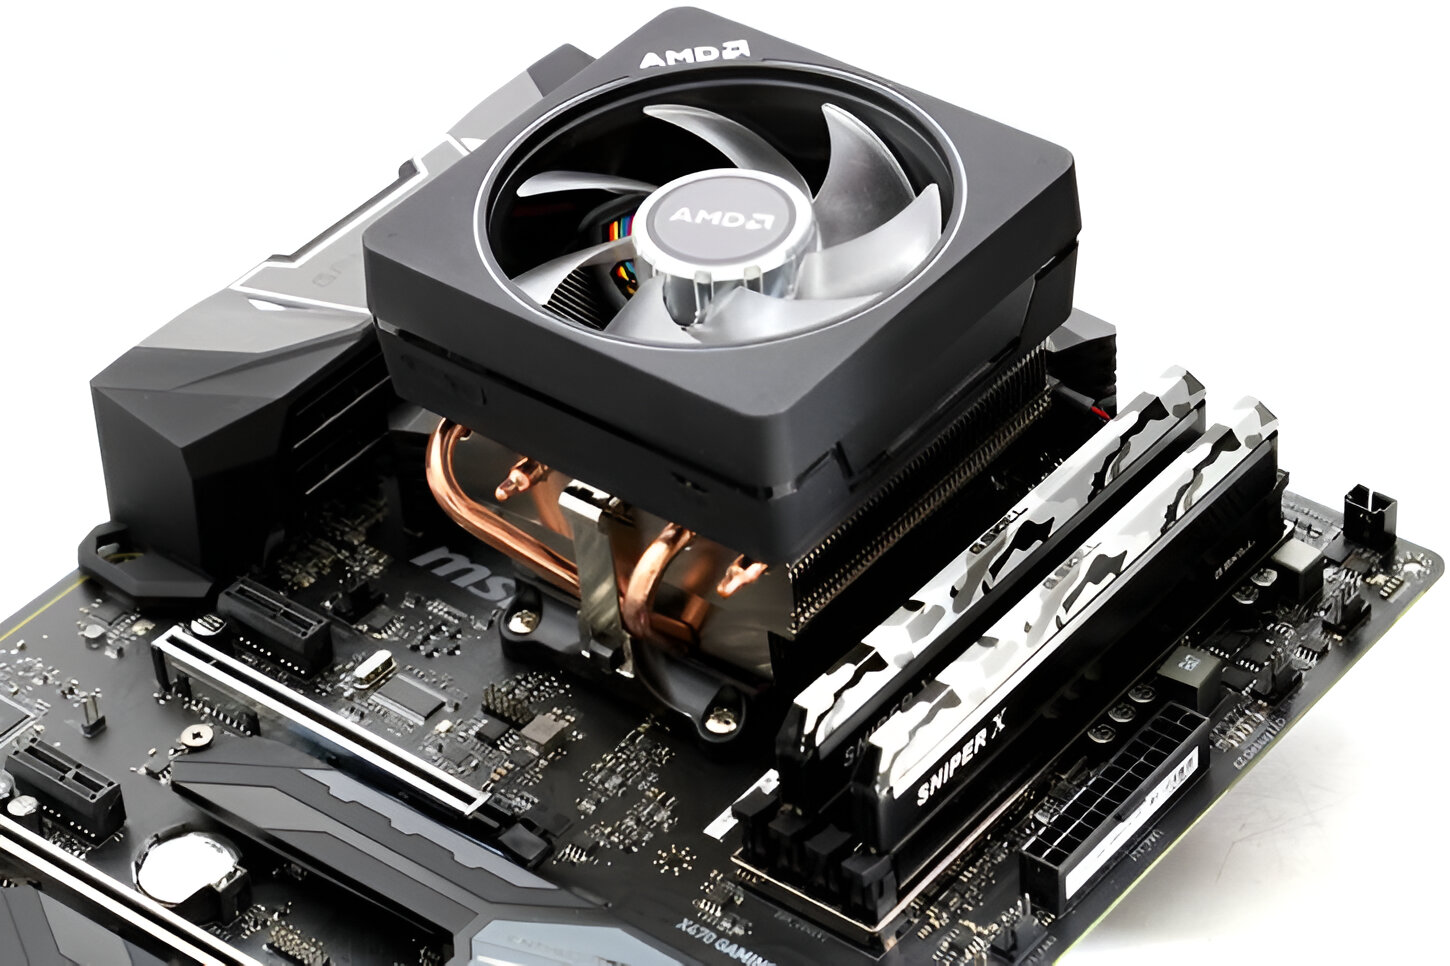 What CPU Cooler Does The 2600X Use